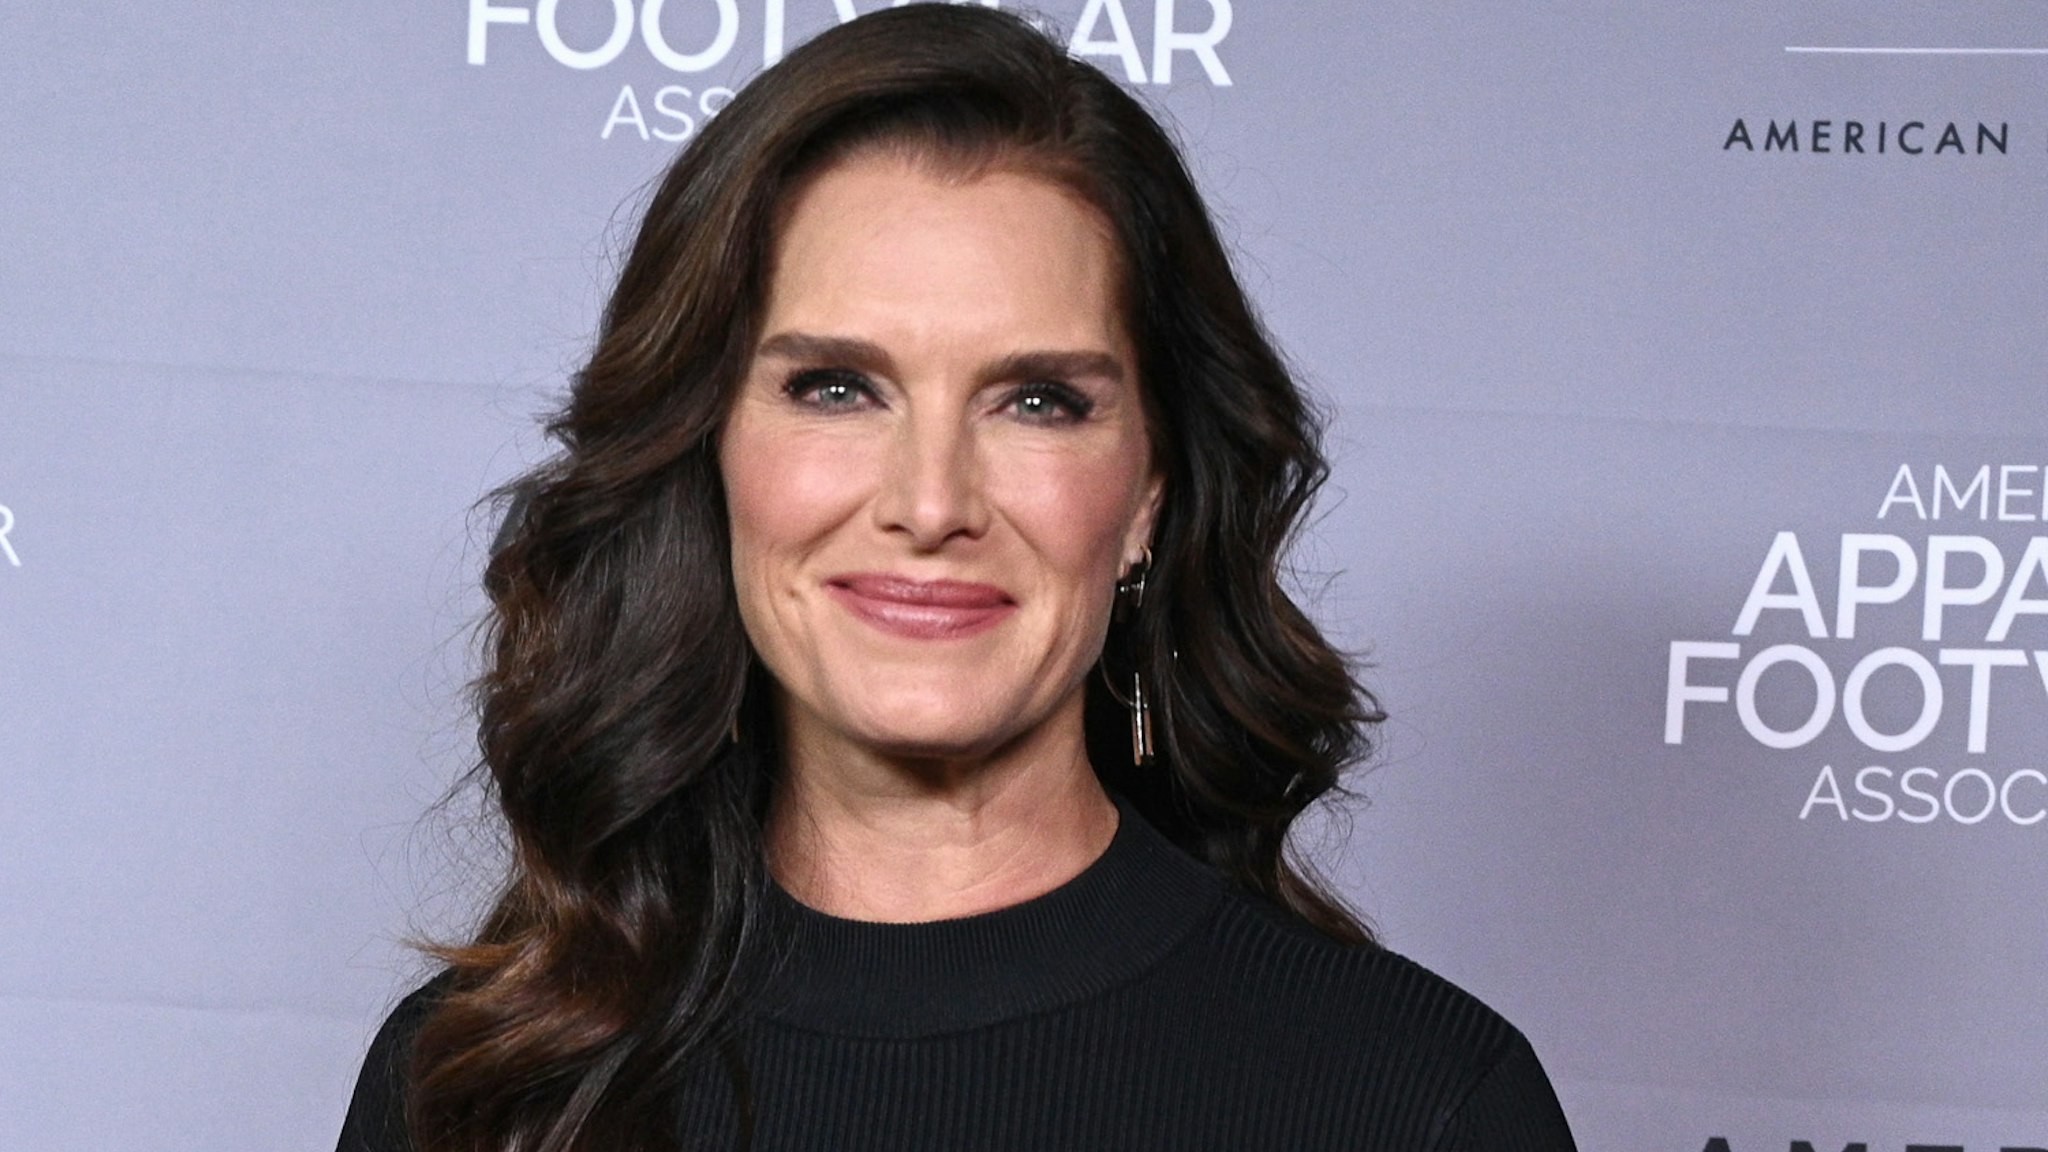 Brooke Shields attends the AAFA American Image Awards 2019 at The Plaza on April 15, 2019 in New York City.